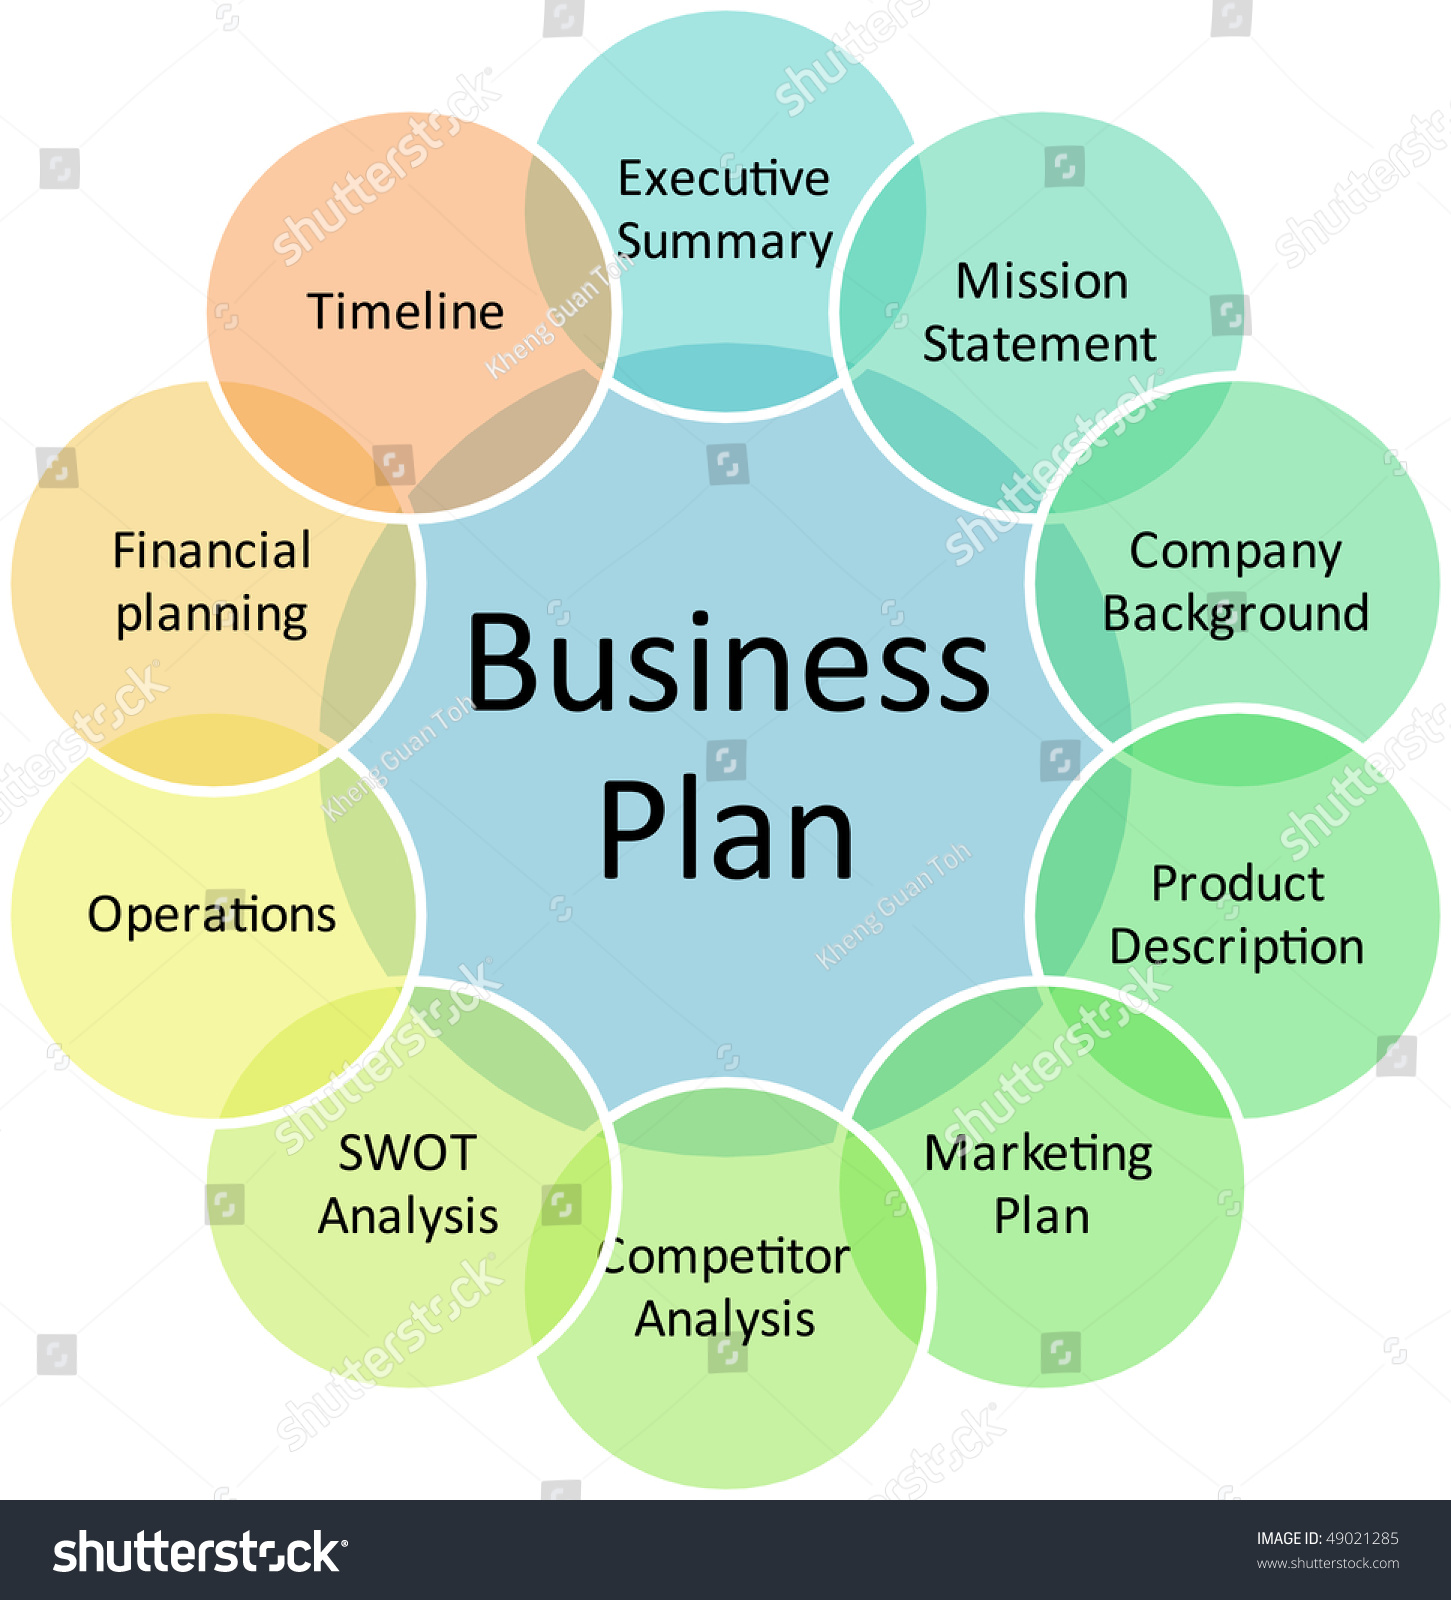 what are the components business plan